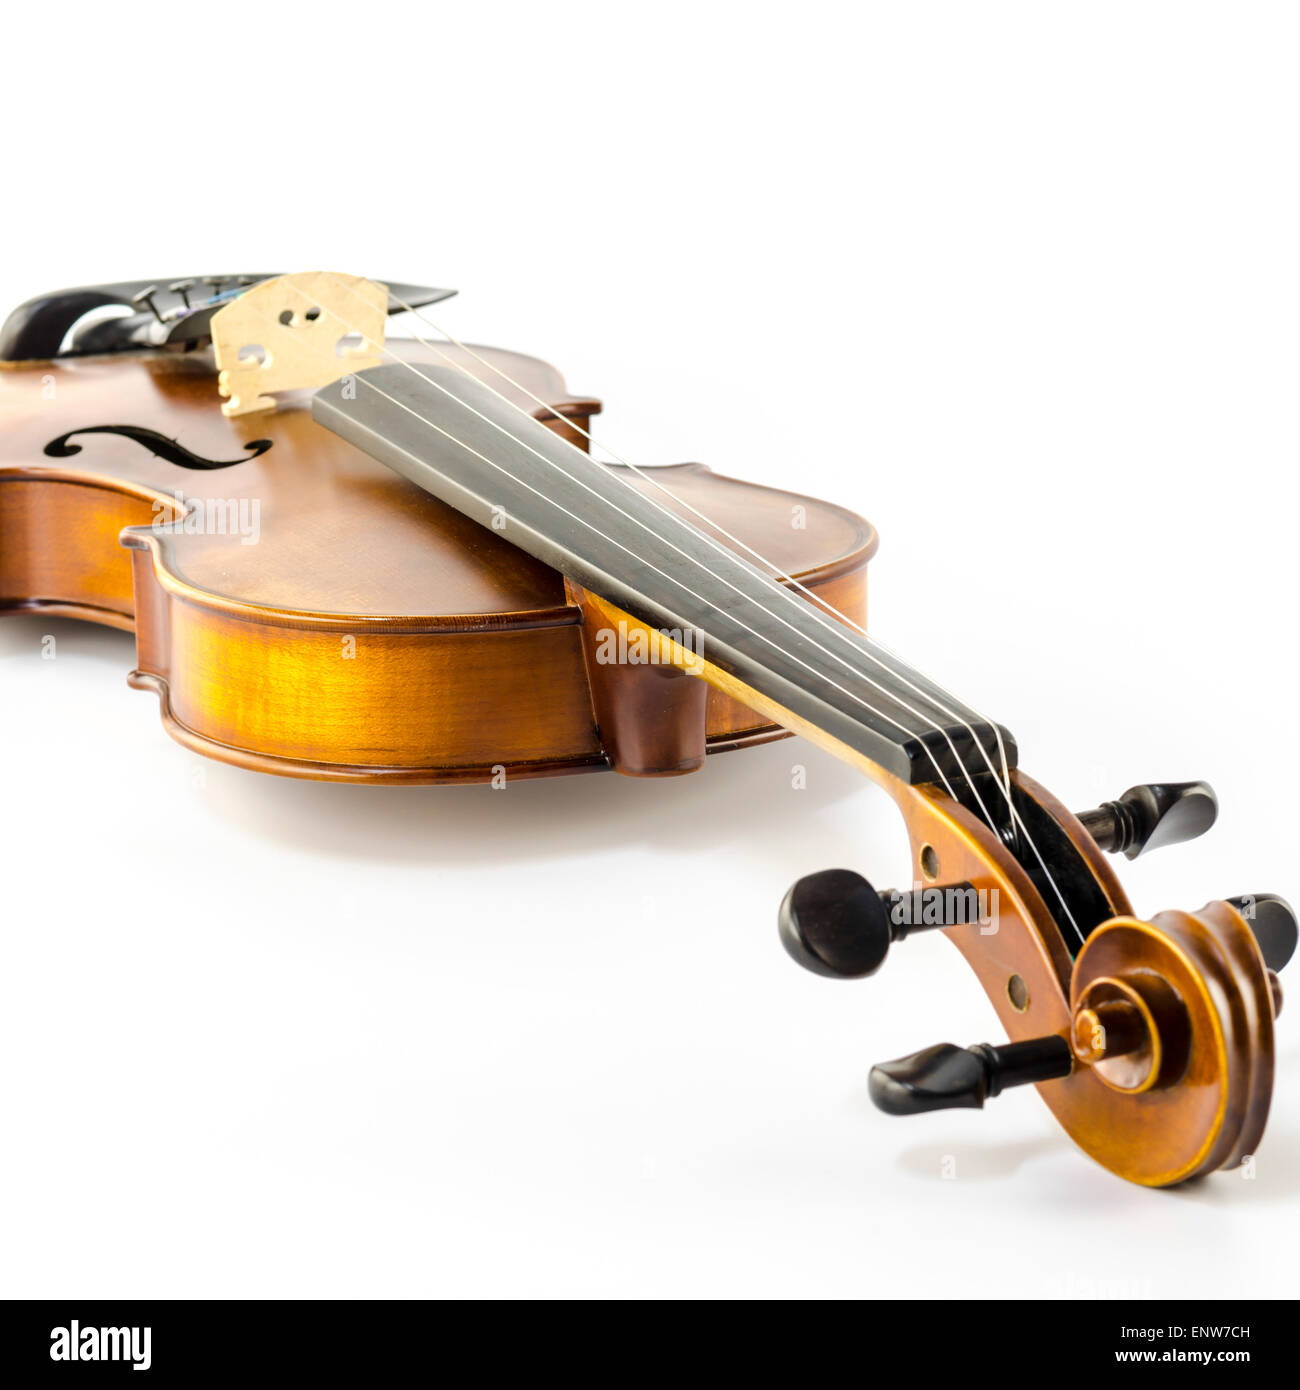 music string instrument violin isolated on white background Stock Photo